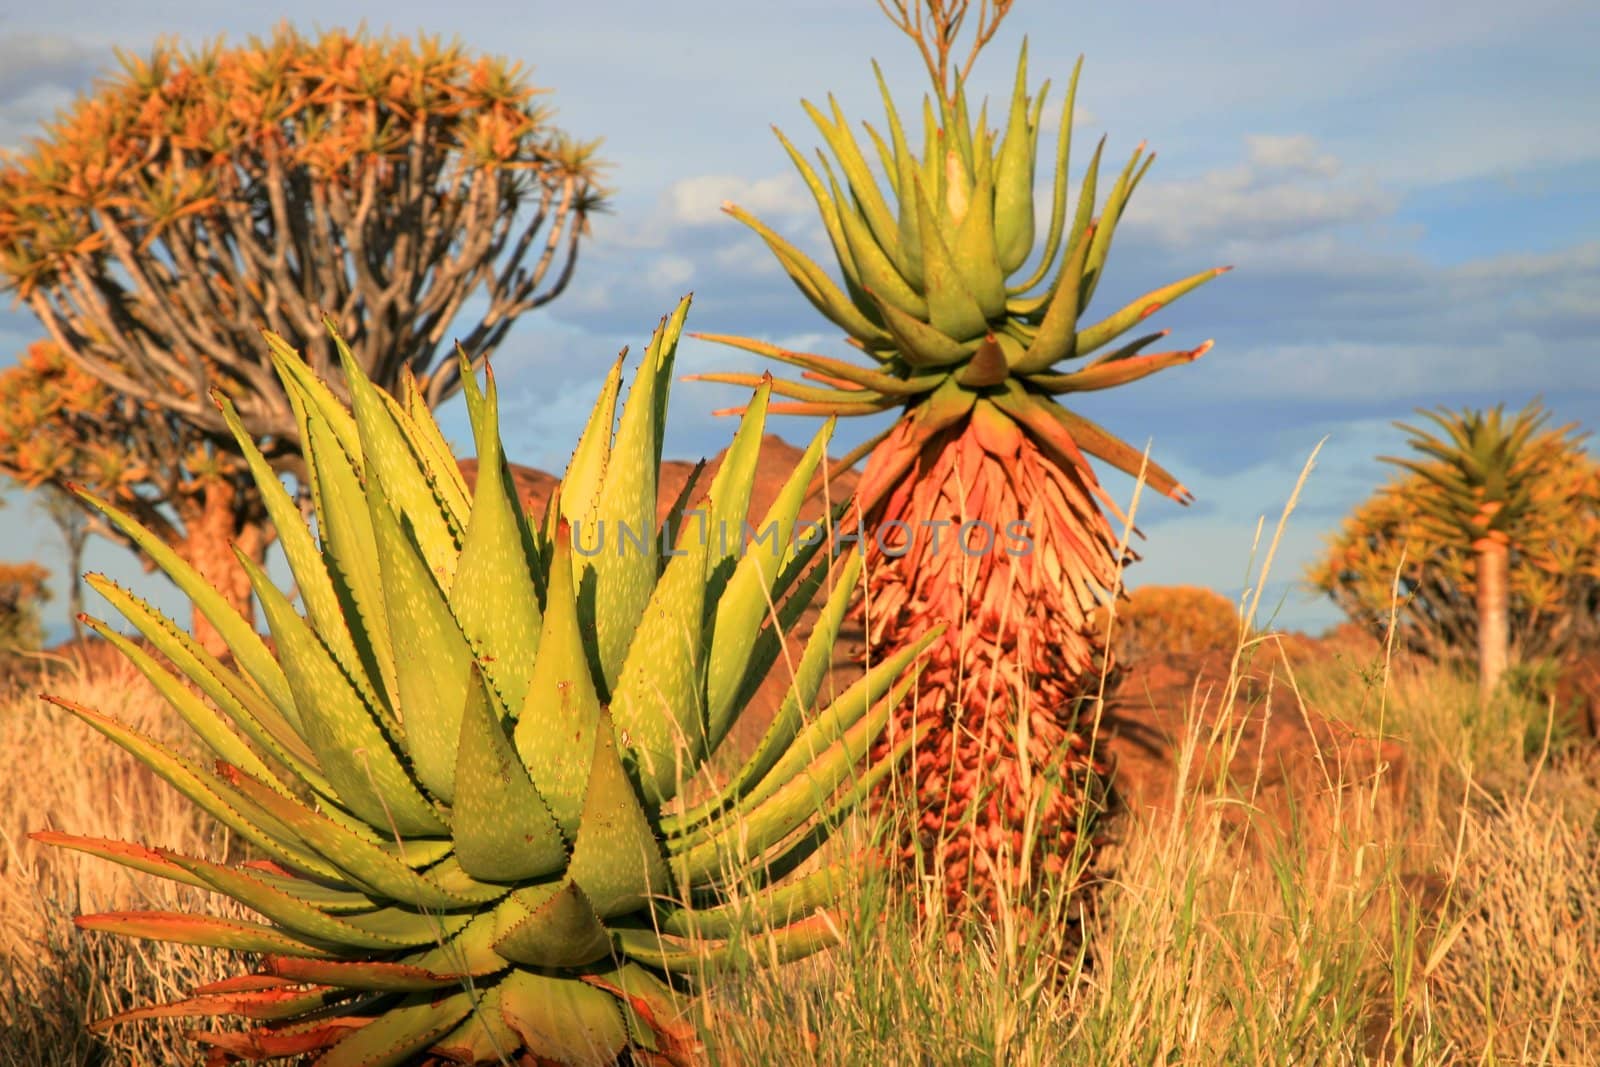 Cactus and Desert landscape with granite rocks and a quiver tree (Aloe dichotoma), Namibia, southern Africa (Background blurred)